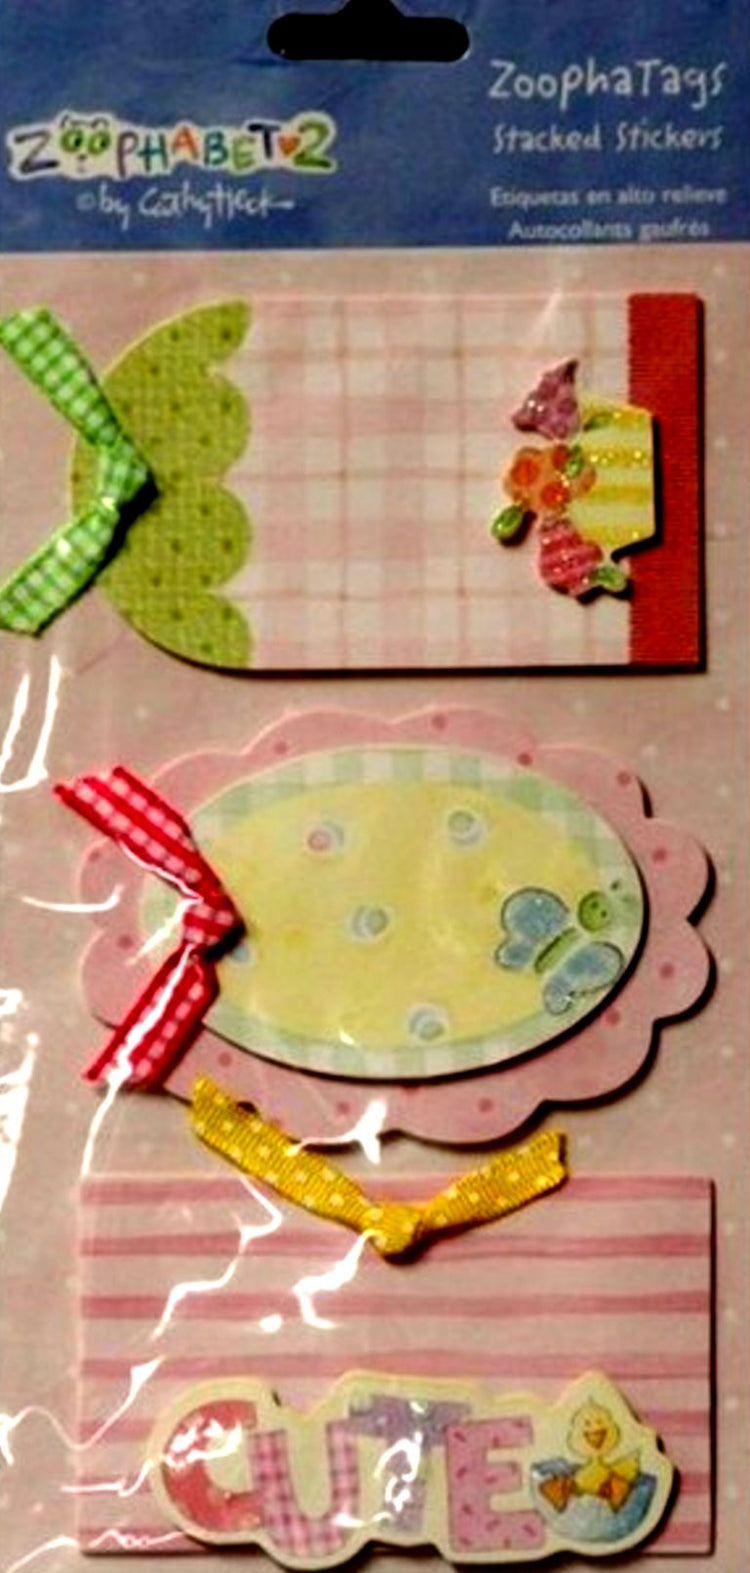 C. R. Gibson Markings Cathy Heck Zoophabet2  Zoopha Baby Tags Stacked Stickers - SCRAPBOOKFARE